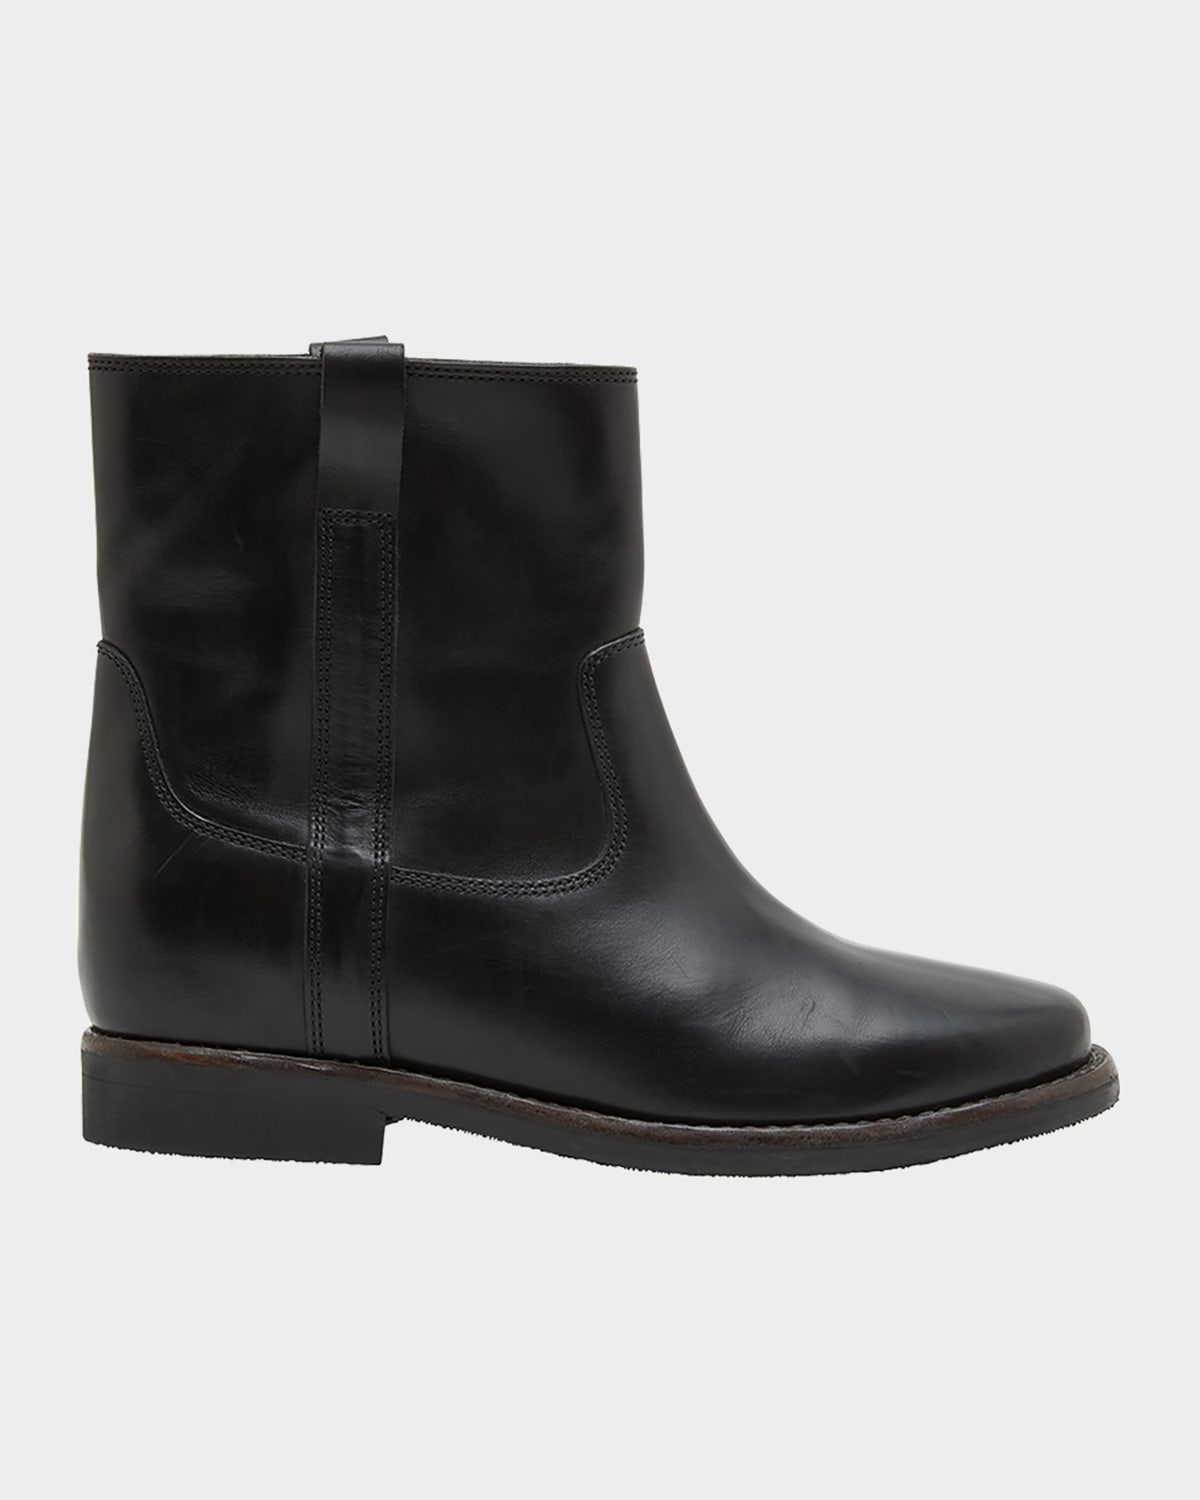 ISABEL MARANT SUSEE LEATHER ANKLE BOOTIES